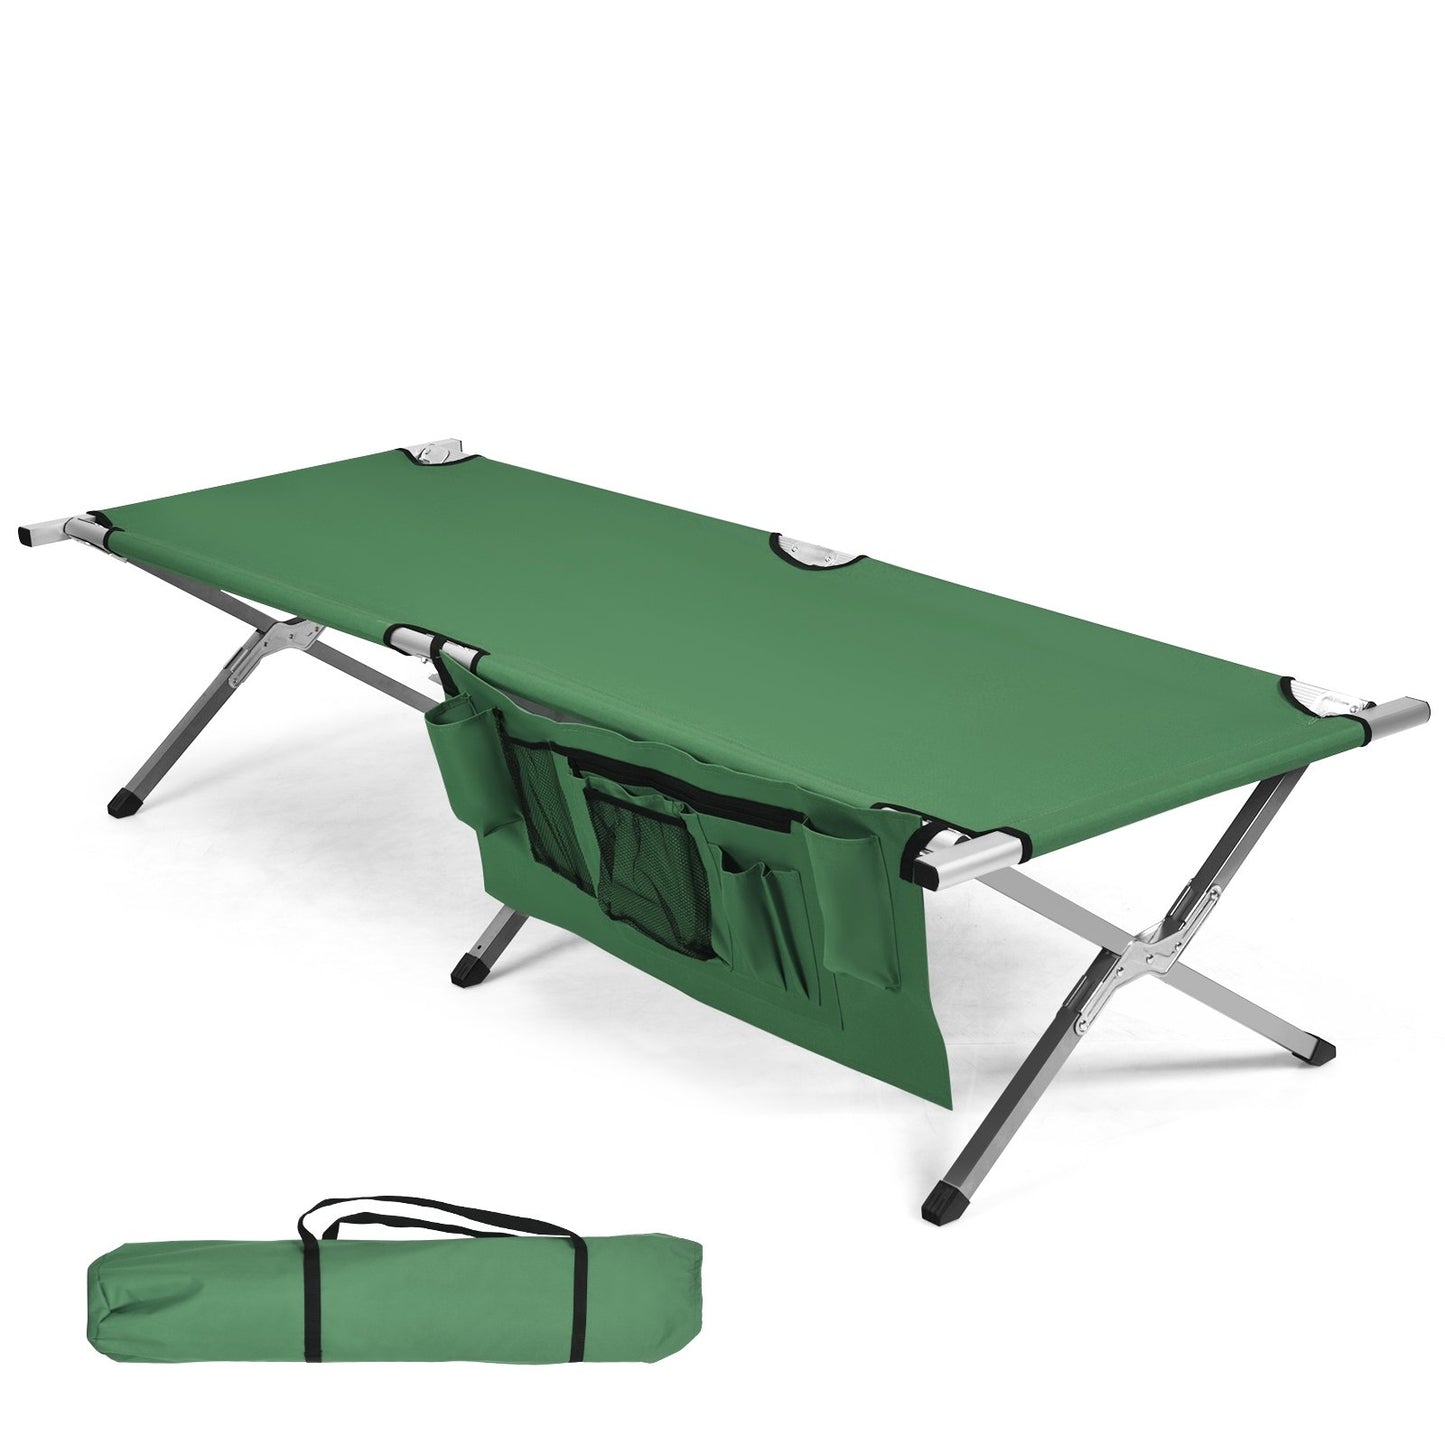 Folding Camping Cot Heavy-duty Camp Bed with Carry Bag, Green